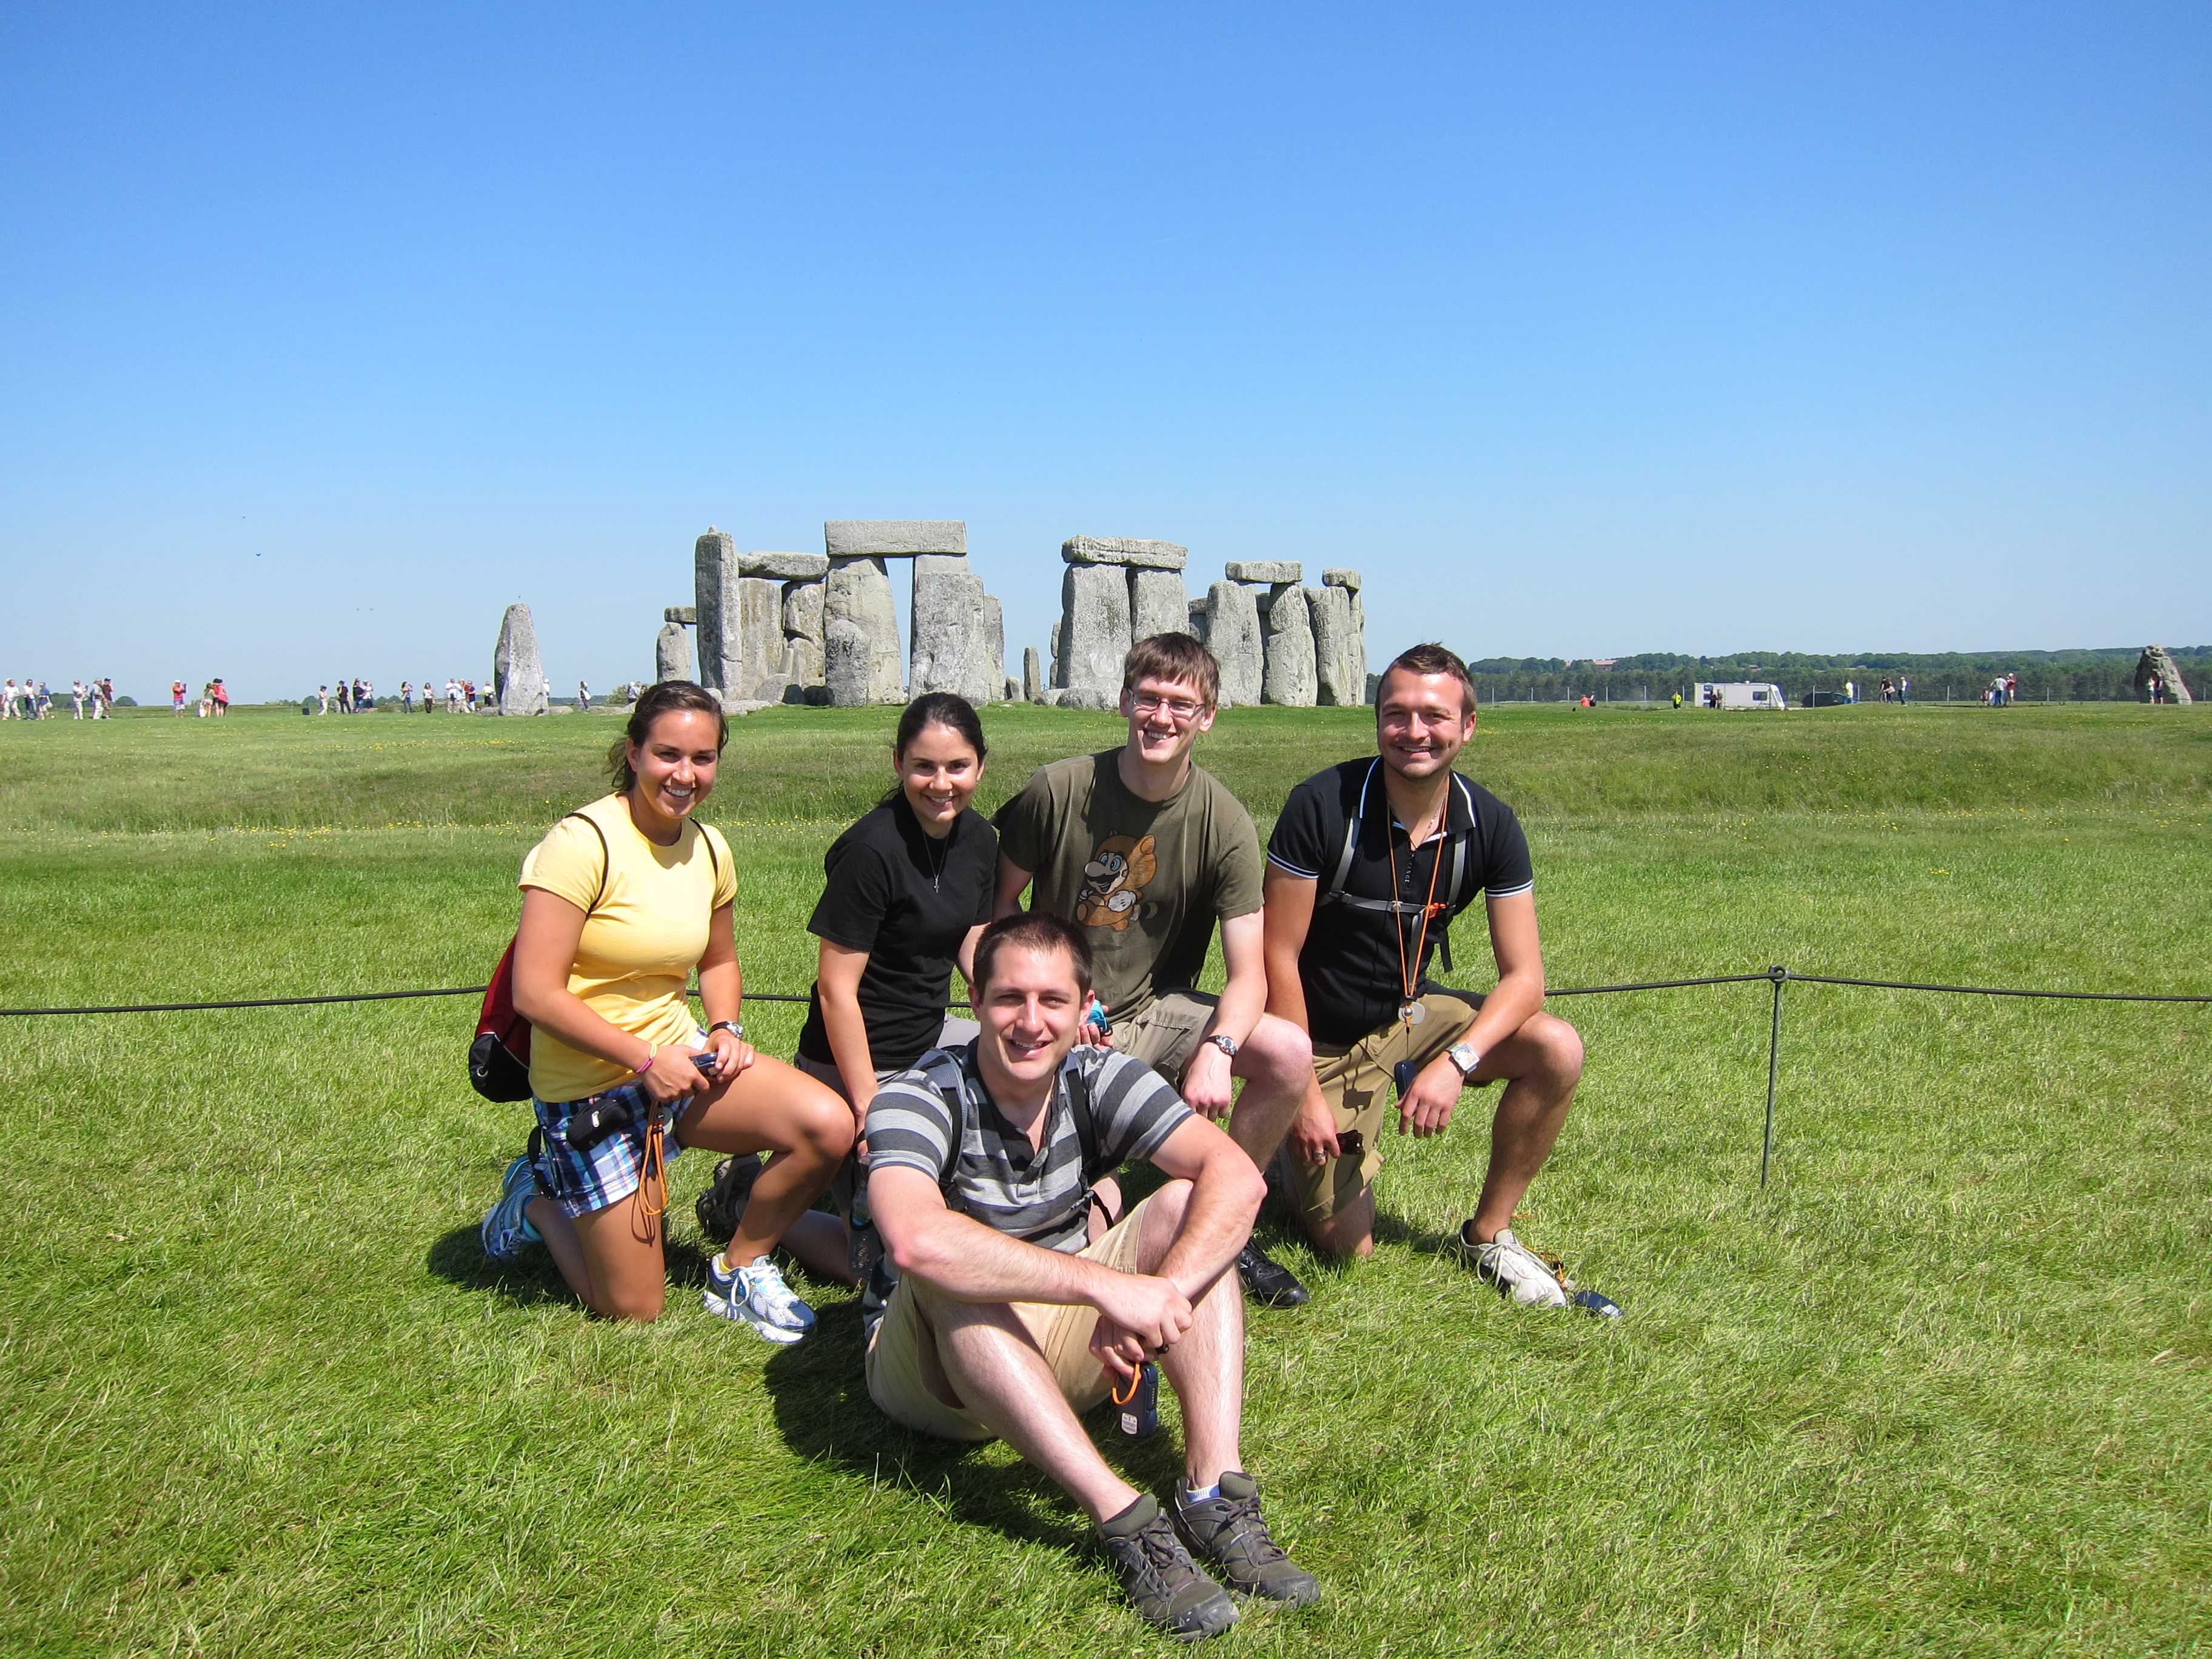 Group picture at Stonehenge